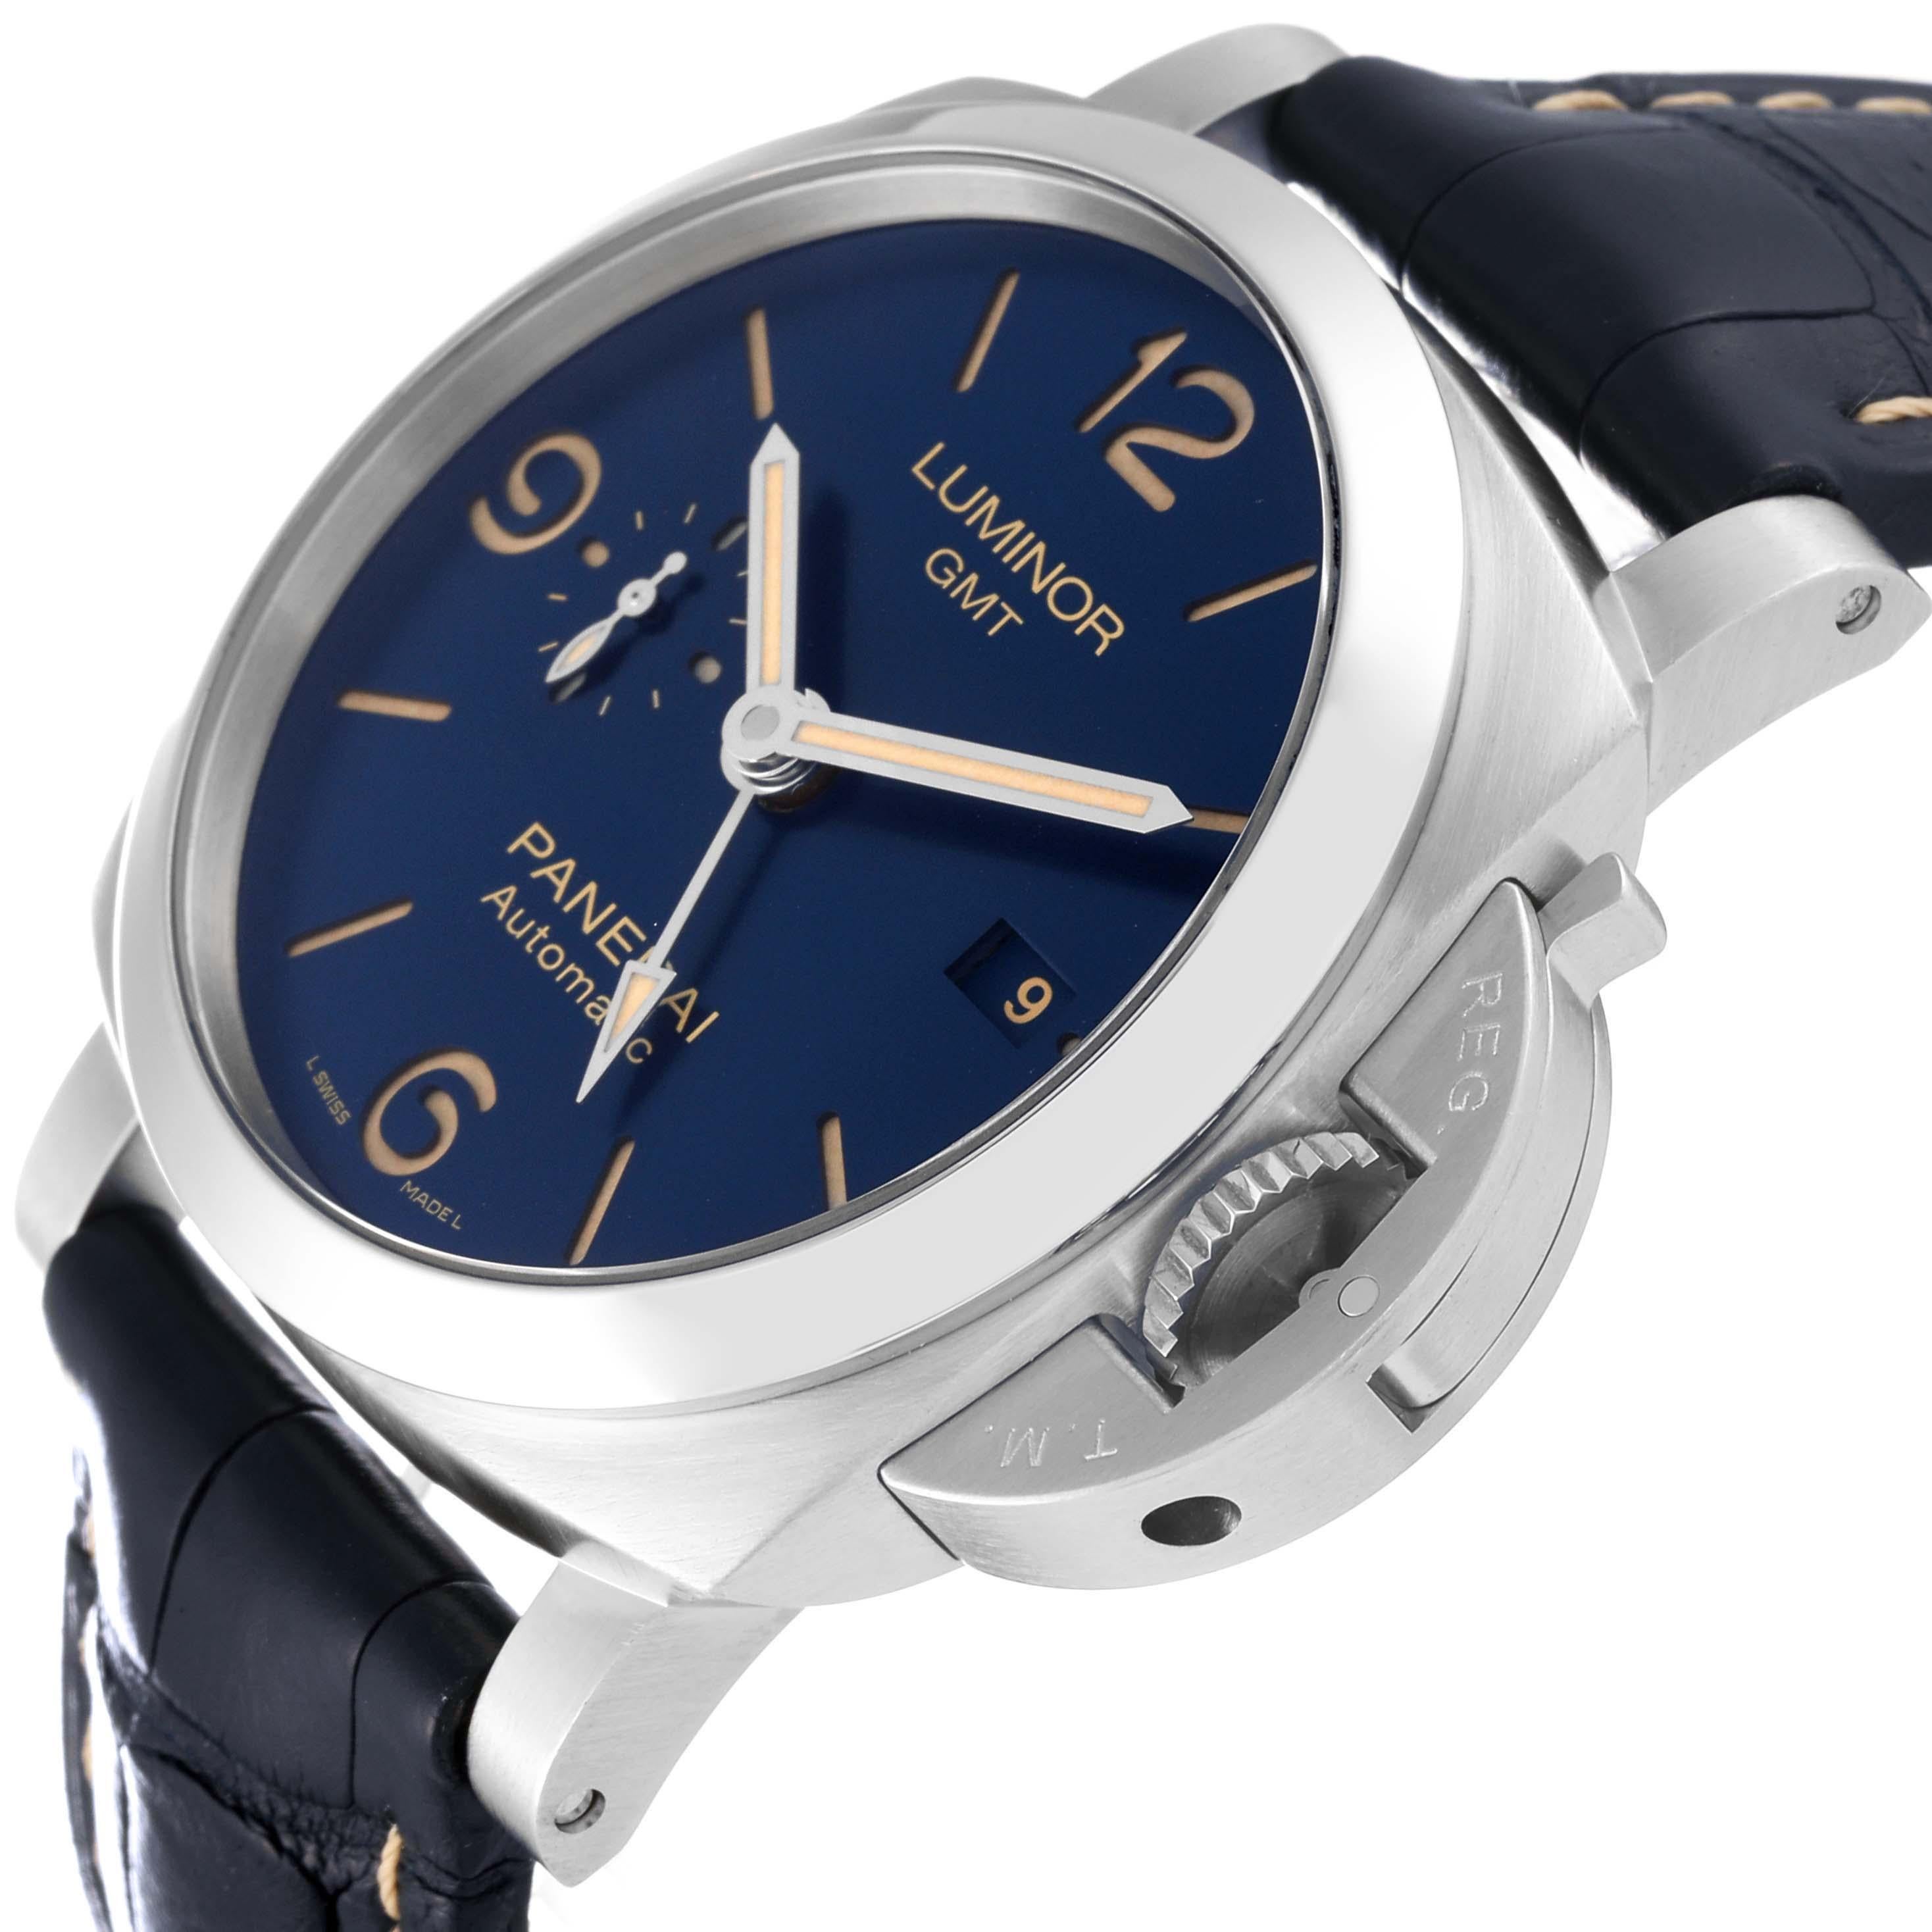 Panerai Luminor 1950 3 Days GMT Blue Dial Steel Mens Watch PAM01033 Box Papers. Automatic self-winding movement. Two part cushion shaped stainless steel case 44.0 mm in diameter. Exhibition transparent sapphire crystal caseback. Polished Panerai